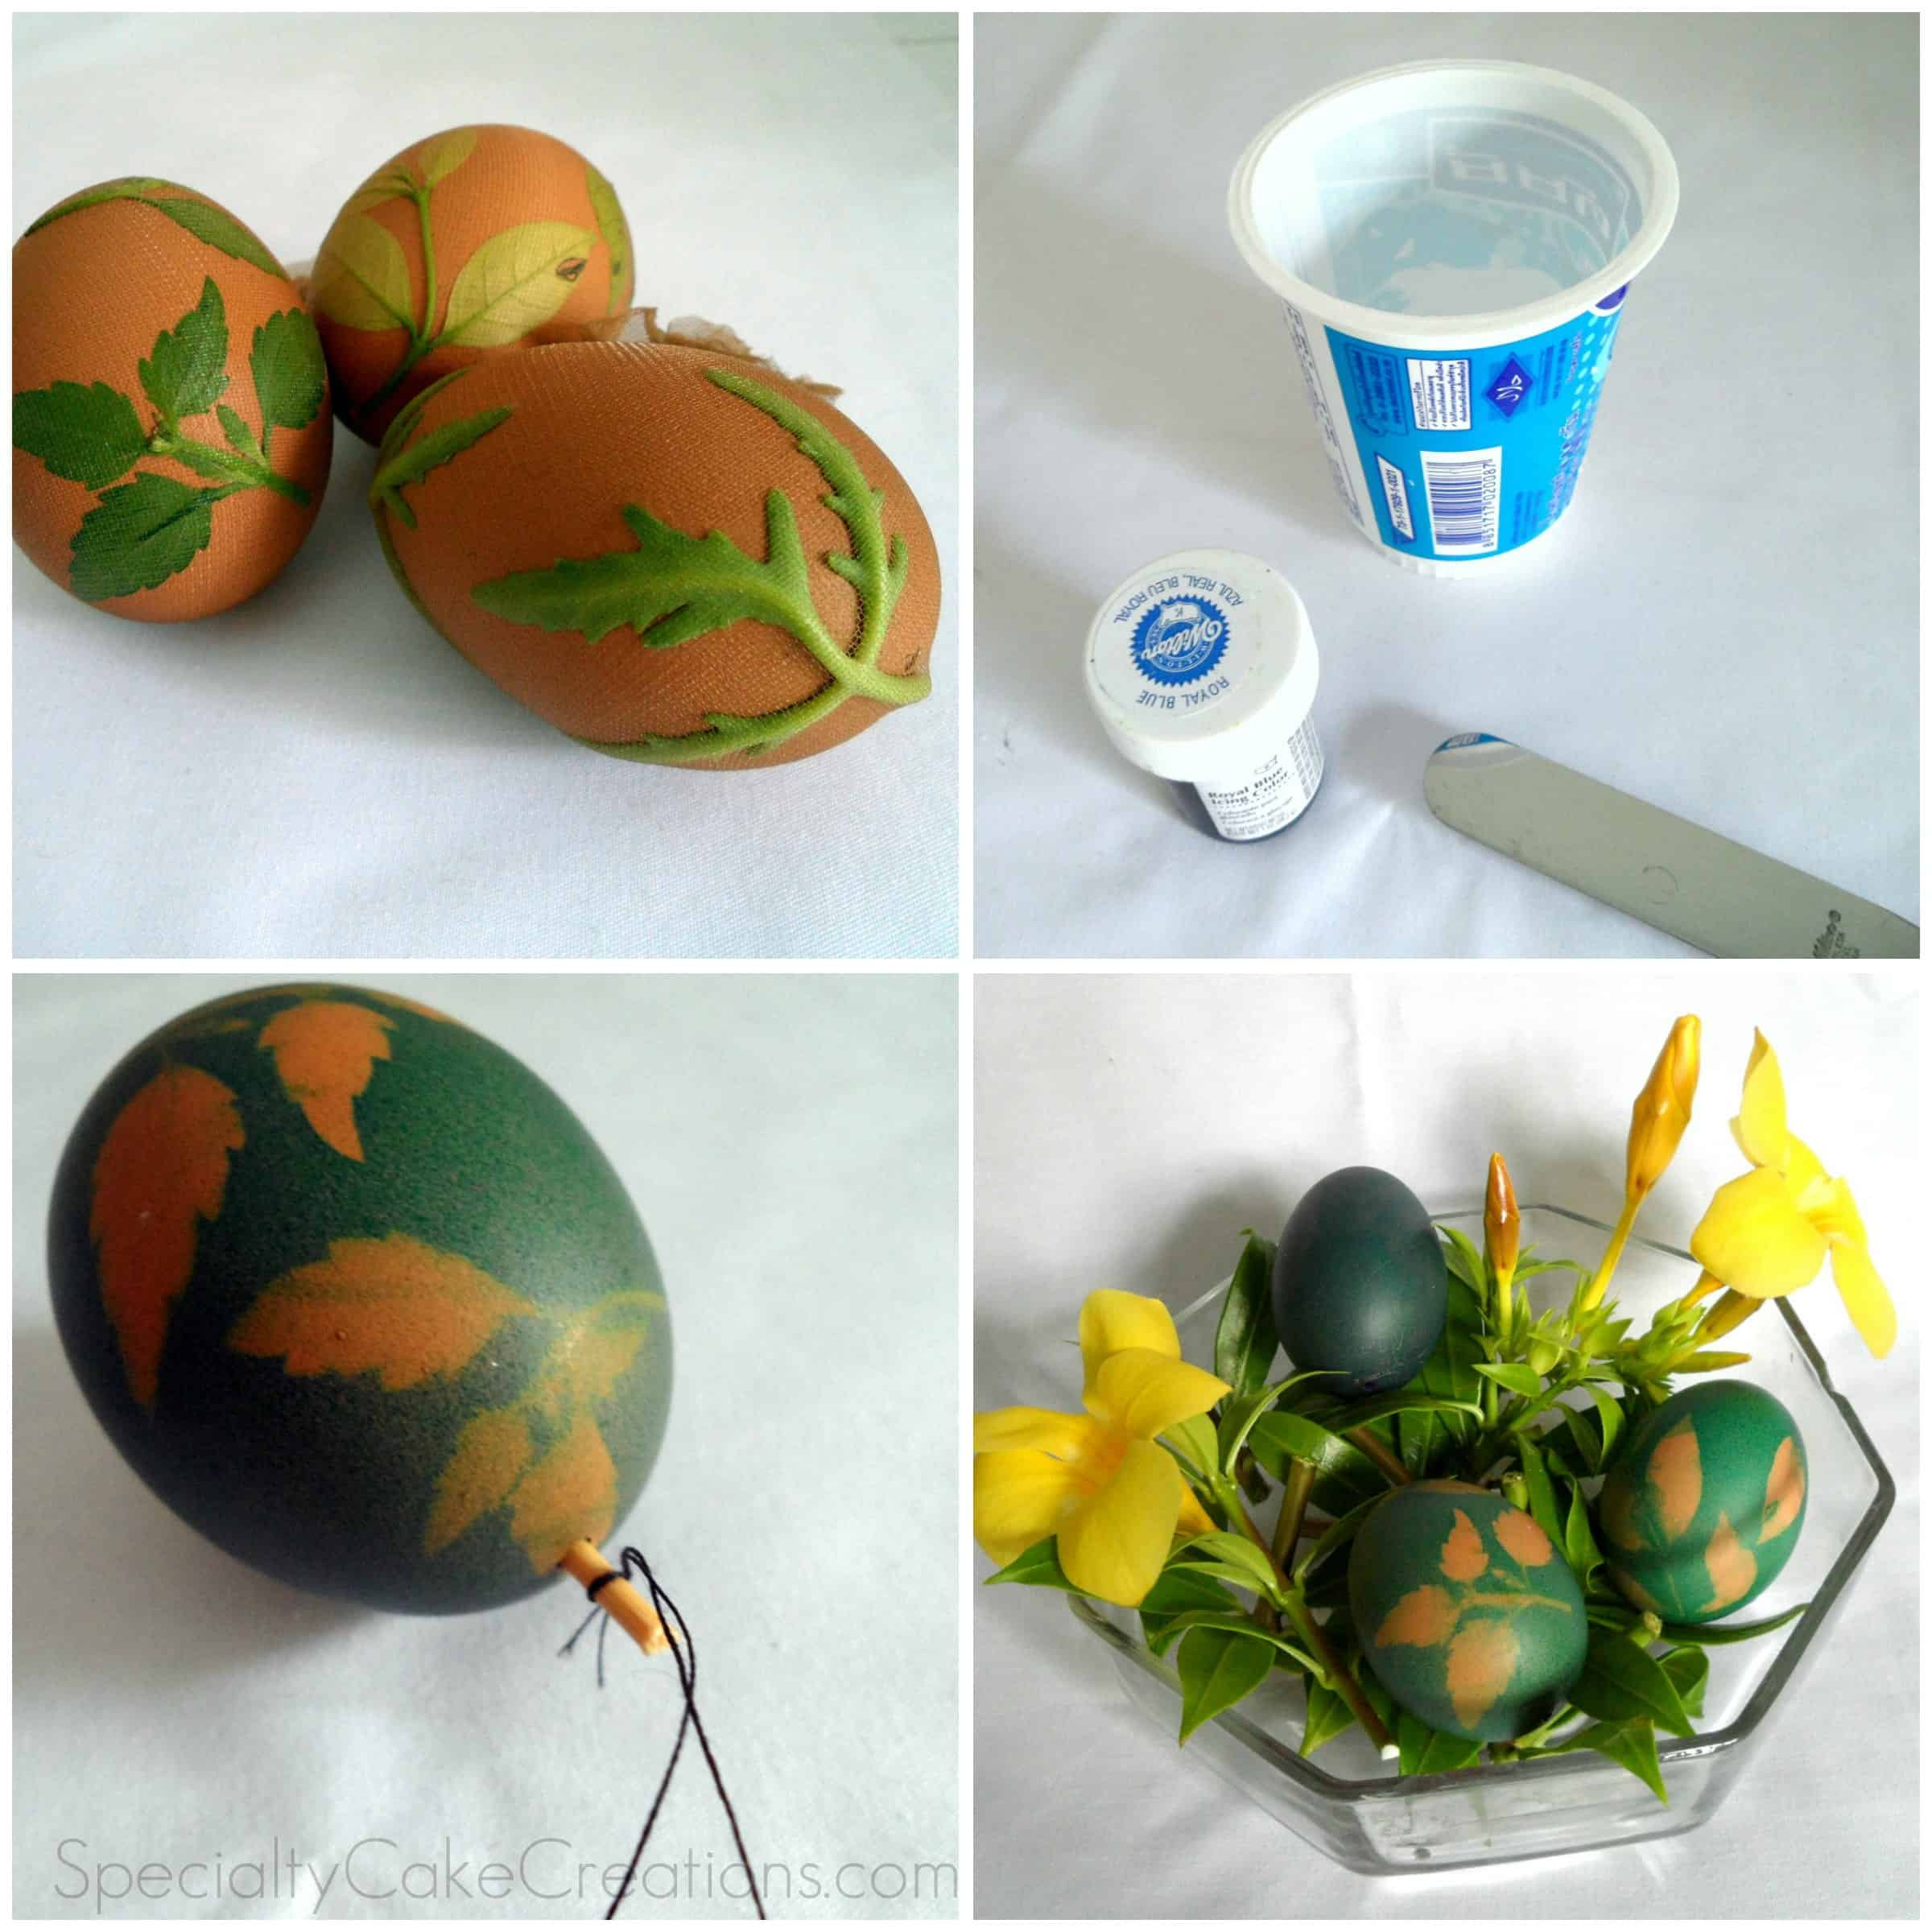 Easter Eggs With Food Coloring
 Leaf Print Easter Eggs with Food Coloring